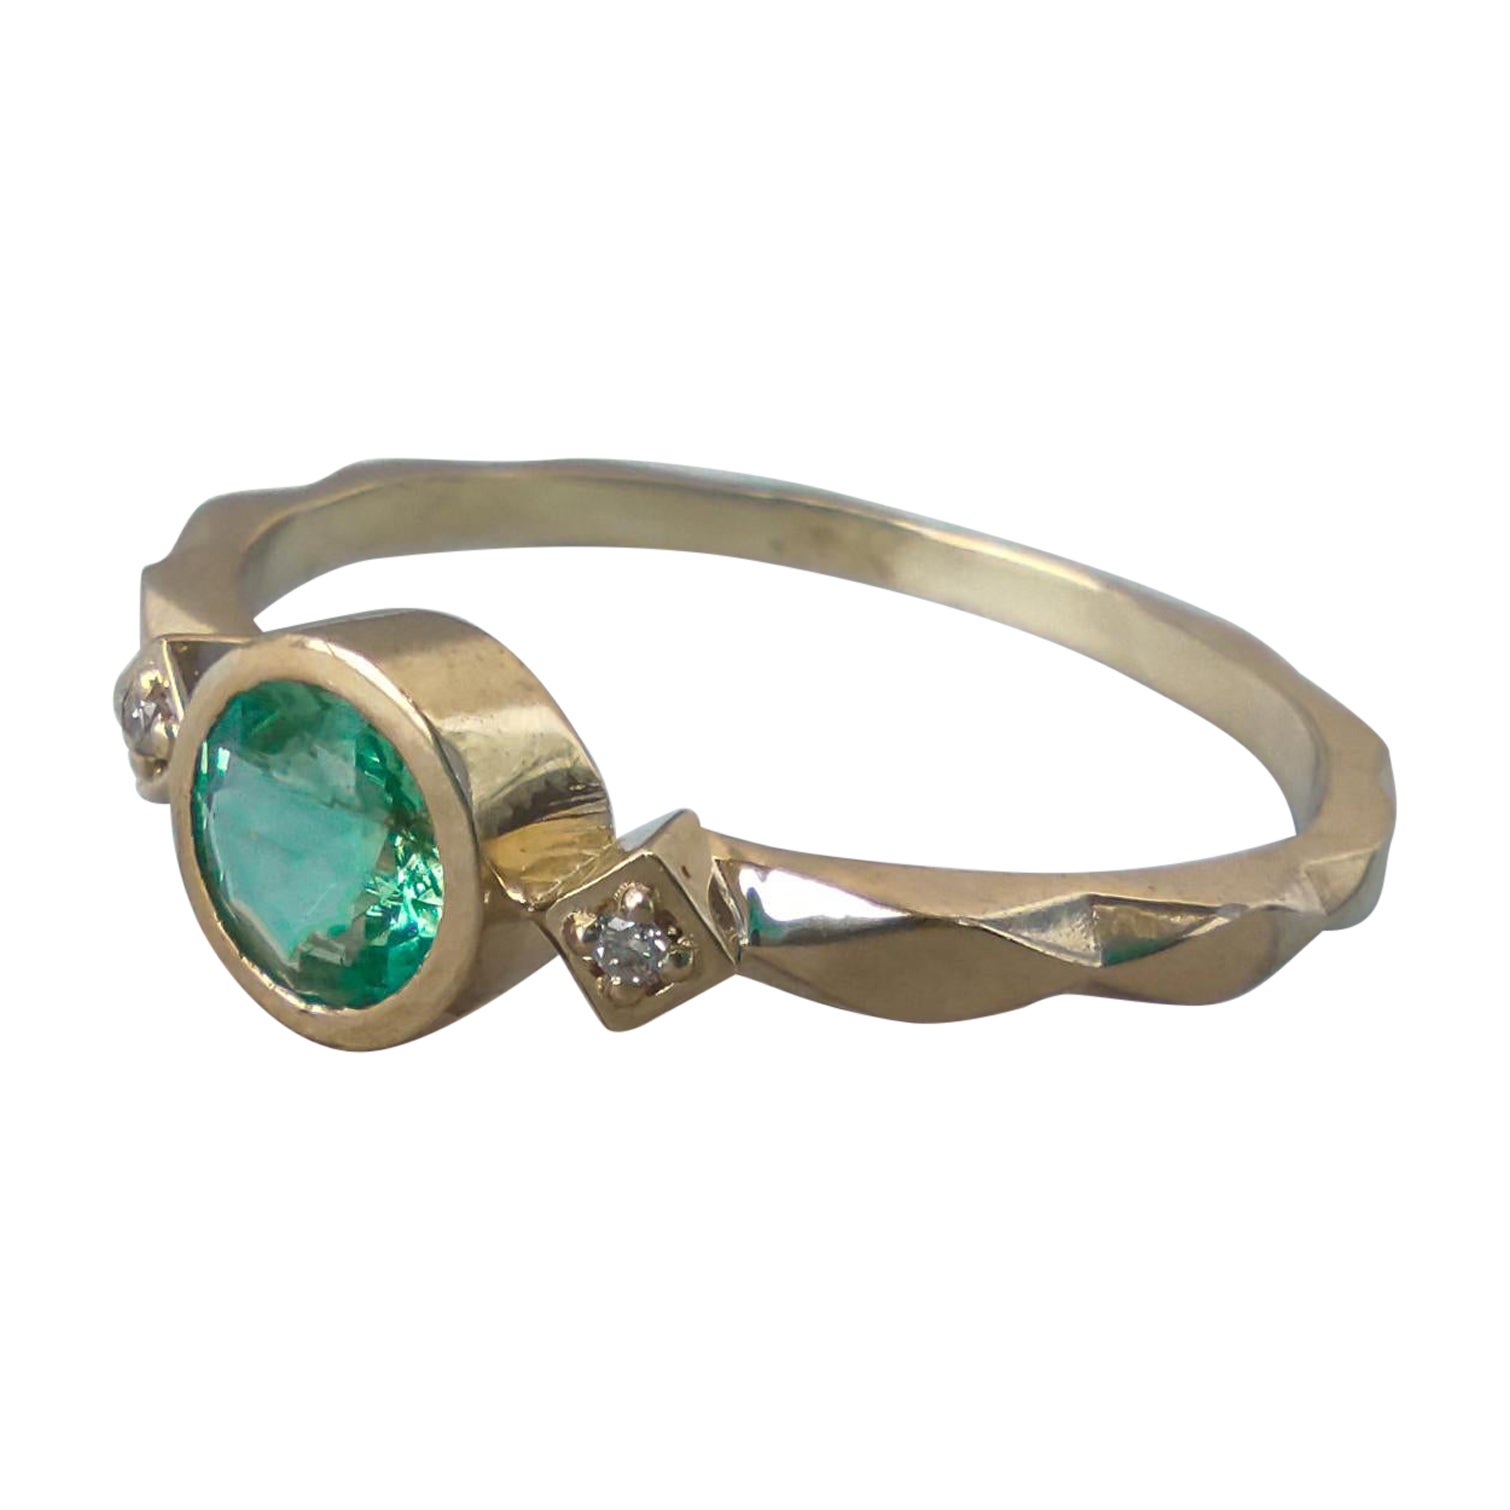 For Sale:  Round Emerald Ring in 14k Gold, Genuine Emerald Ring